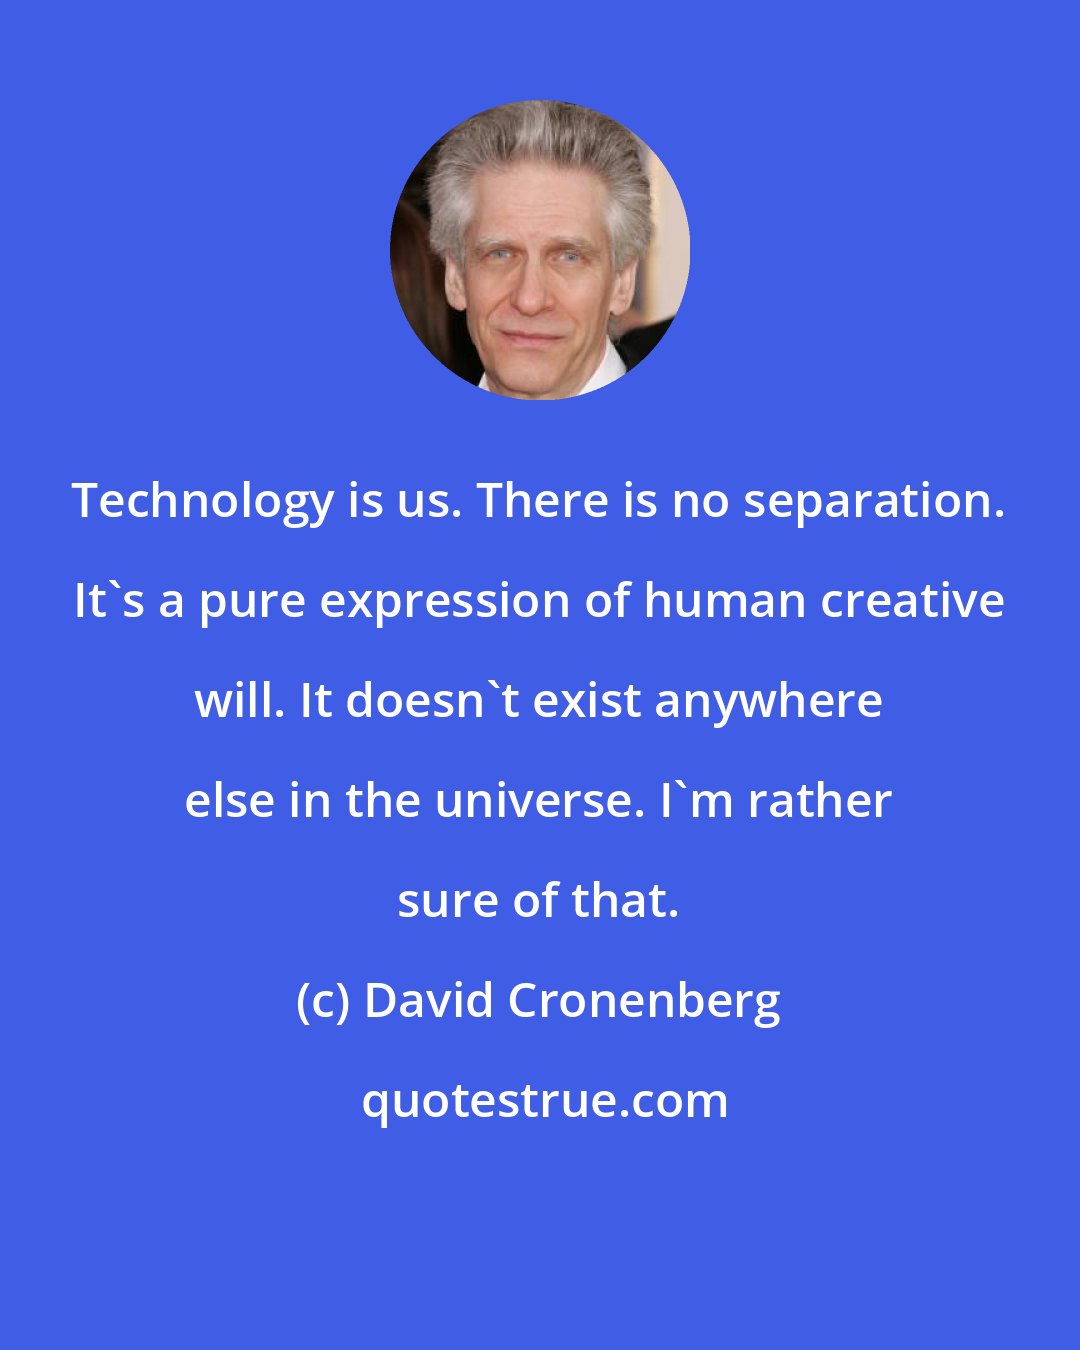 David Cronenberg: Technology is us. There is no separation. It's a pure expression of human creative will. It doesn't exist anywhere else in the universe. I'm rather sure of that.